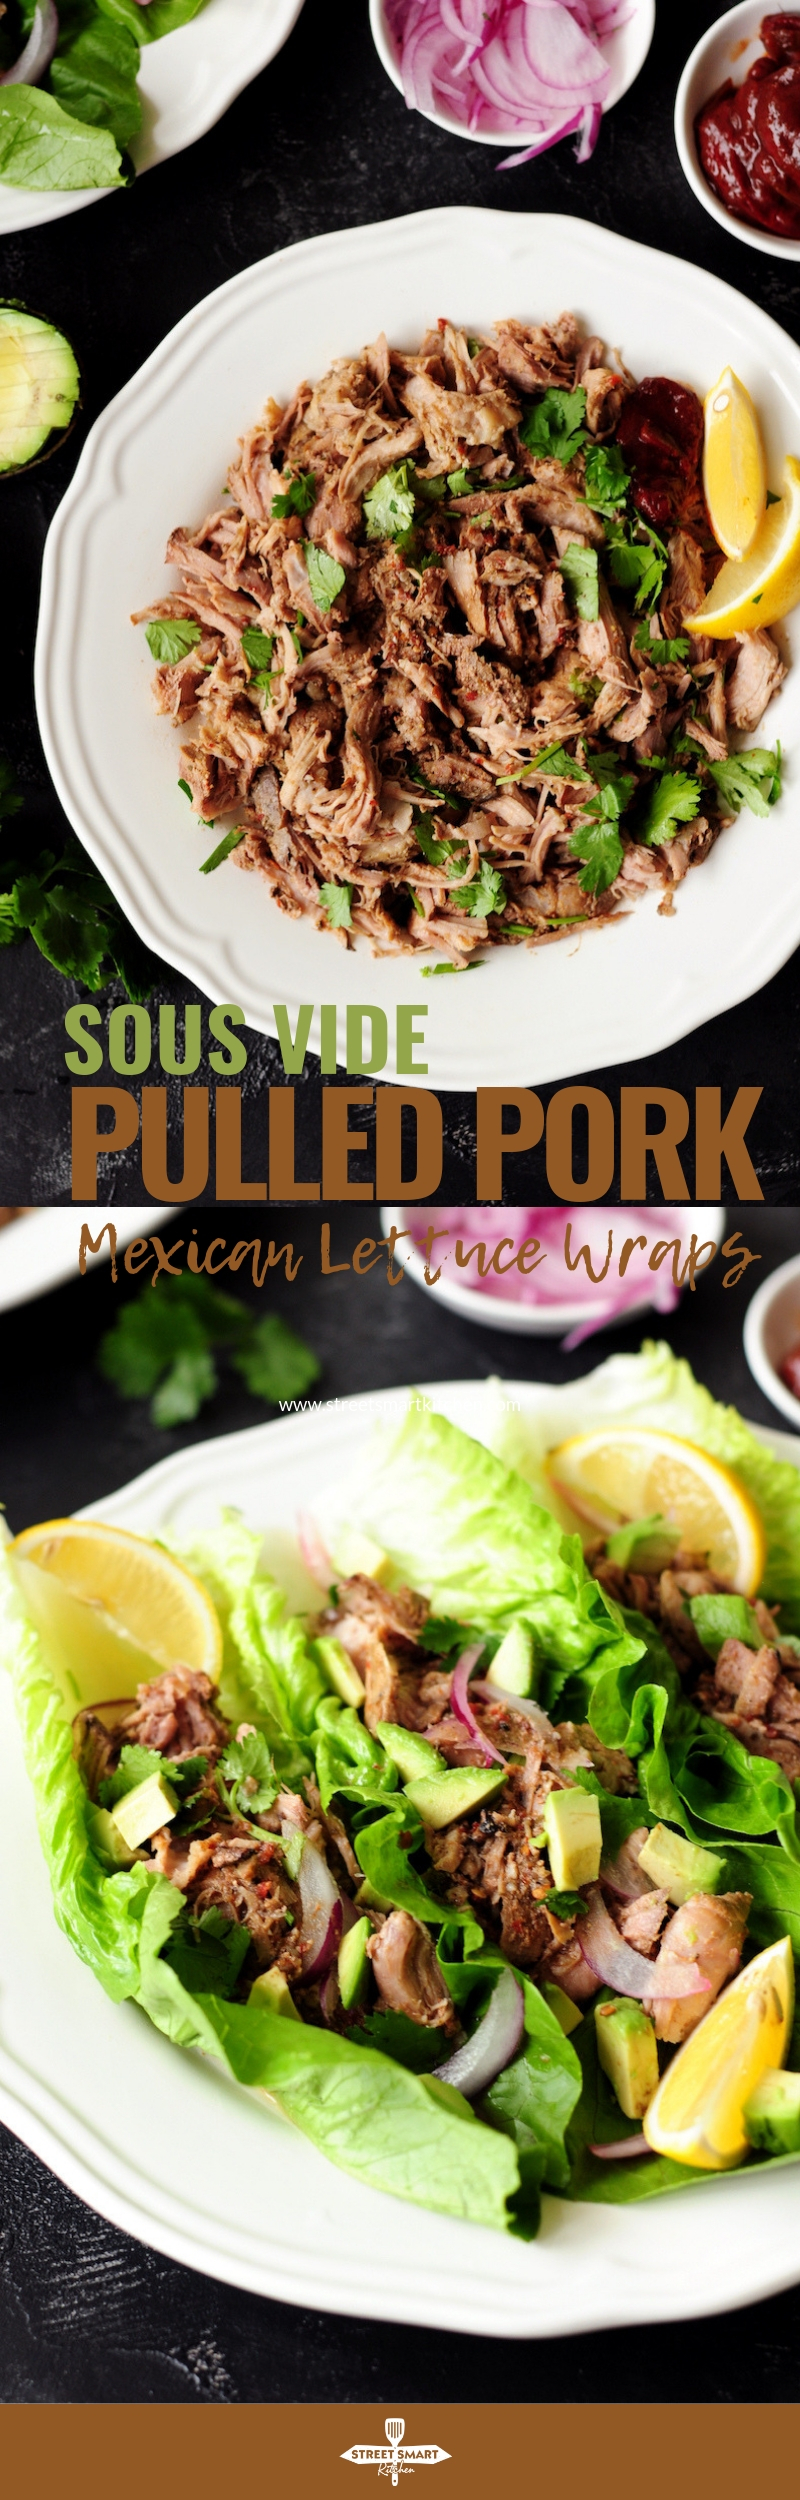 Loaded with Mexican flavor, this sous vide pulled pork folded in fresh lettuce leaves is the perfect way to keep weekday low-carb meals exciting.